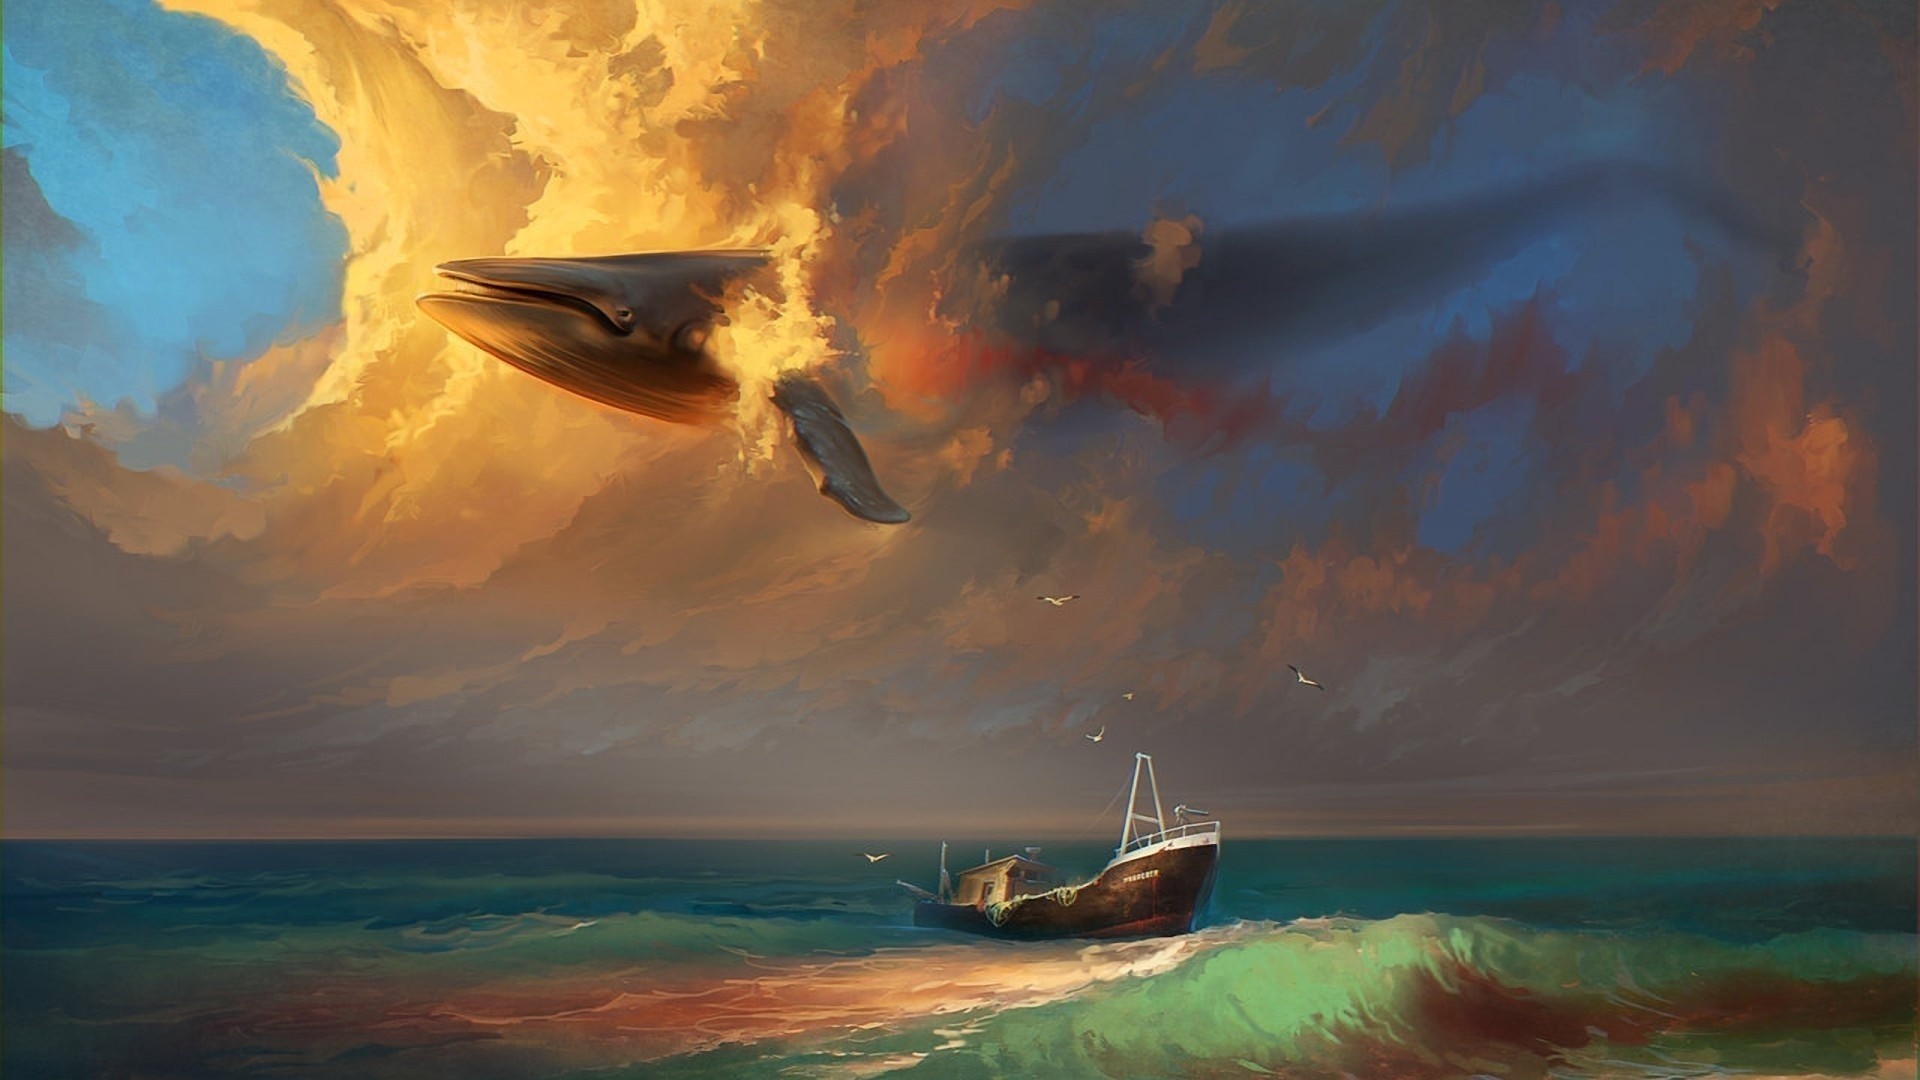 1920x1080 ... Rhads Sorrow Ocean Sad Whales Emotion Ships Artistic Clouds Fantasy  Wreck Dream Shipwreck Surreal Digital Mood Animals Ruins Vehicles Wallpapers  With